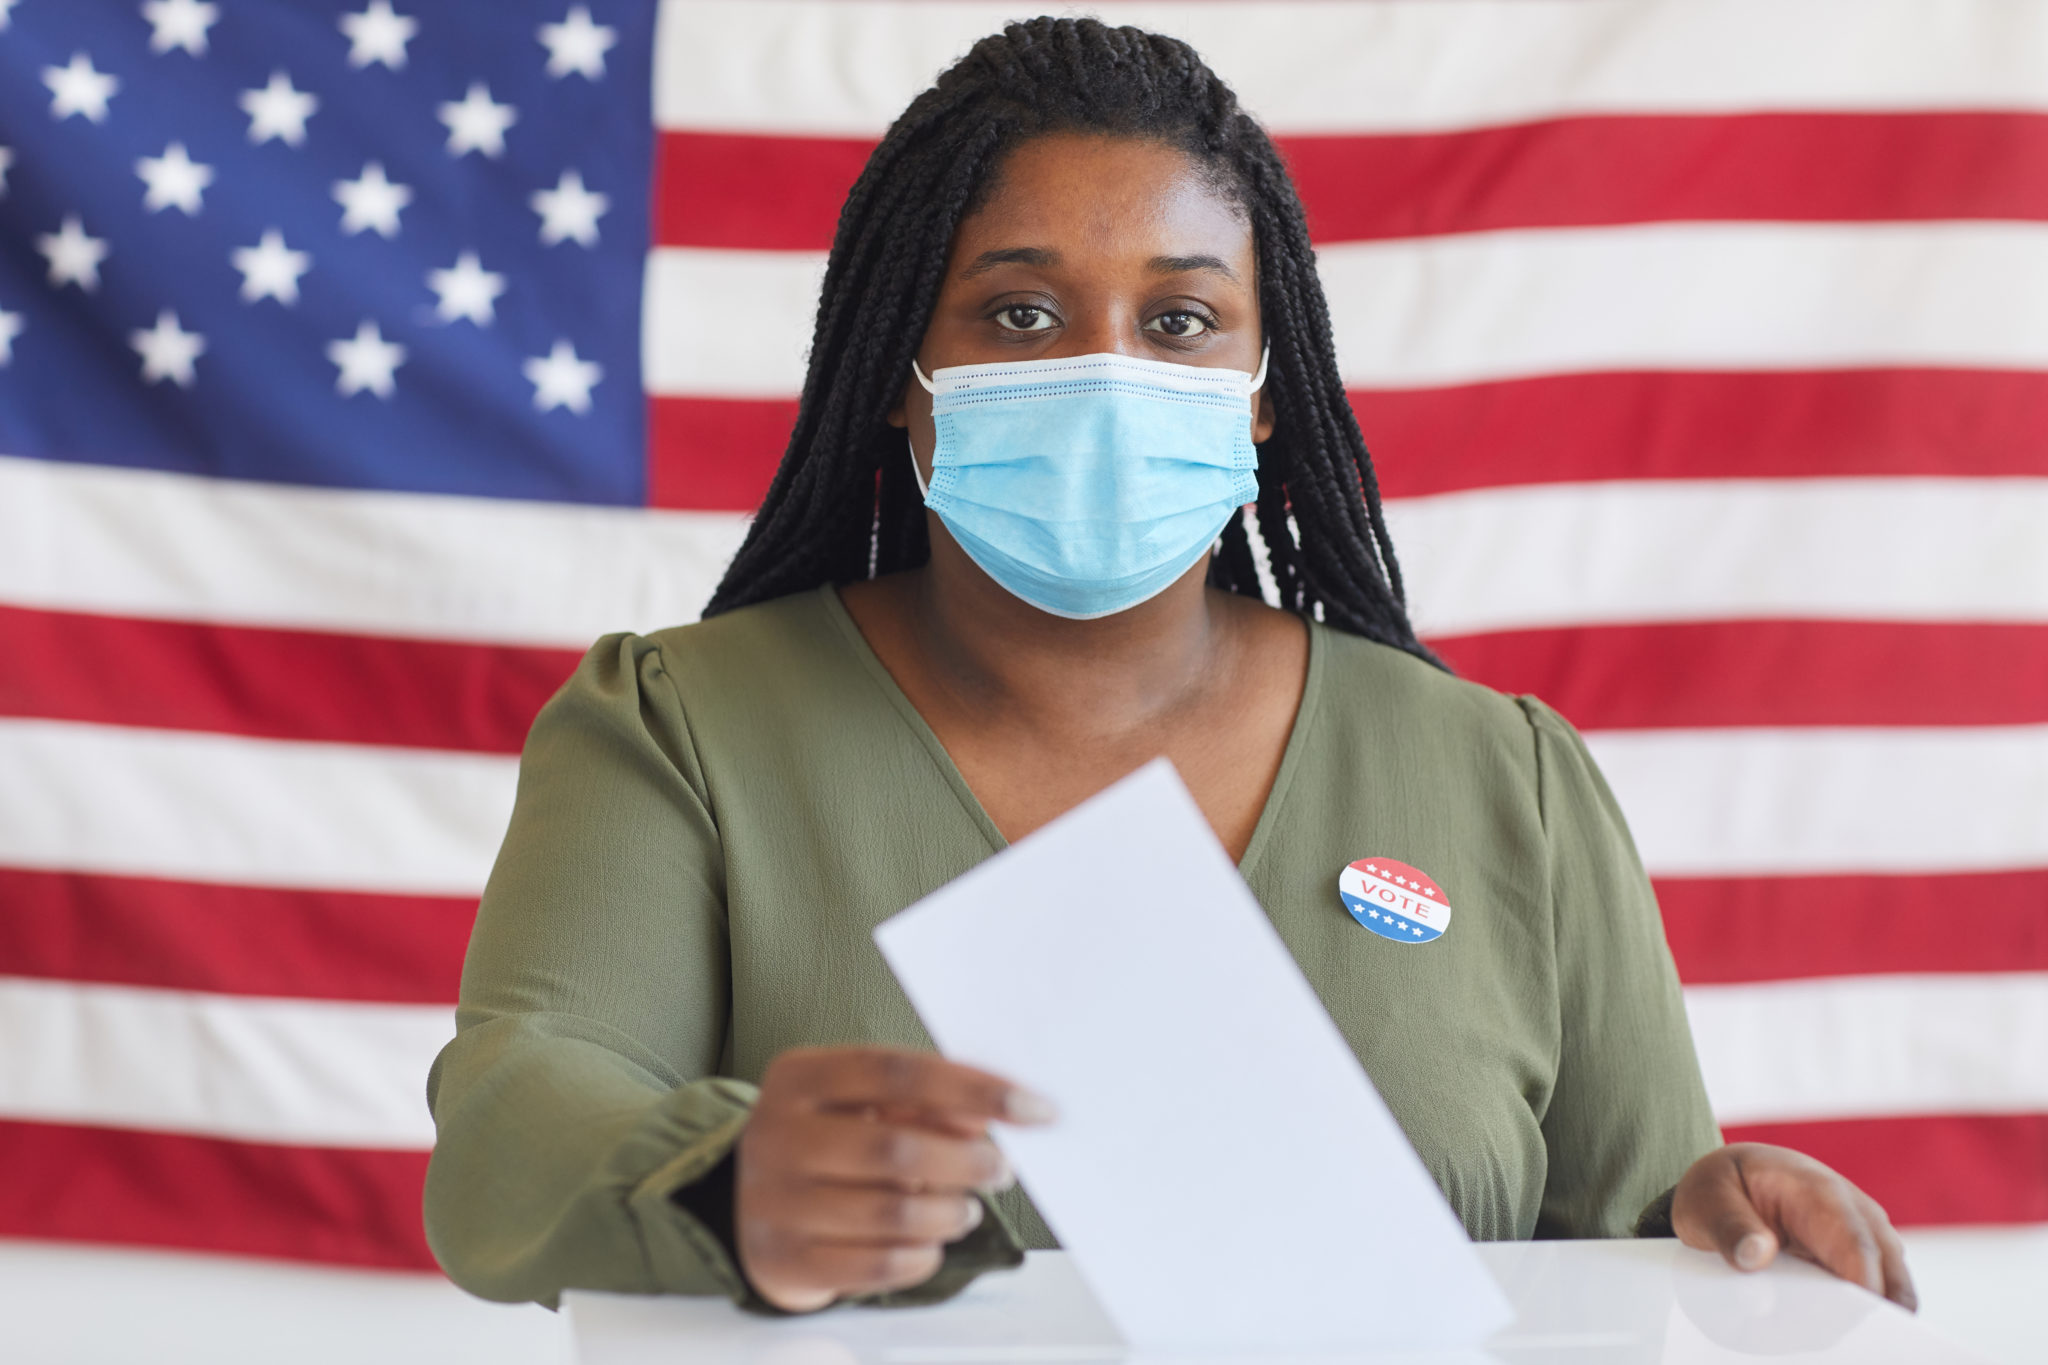 Portrait of young African-American woman wearing mask putting vote bulletin in ballot box and looking at camera while standing against American flag